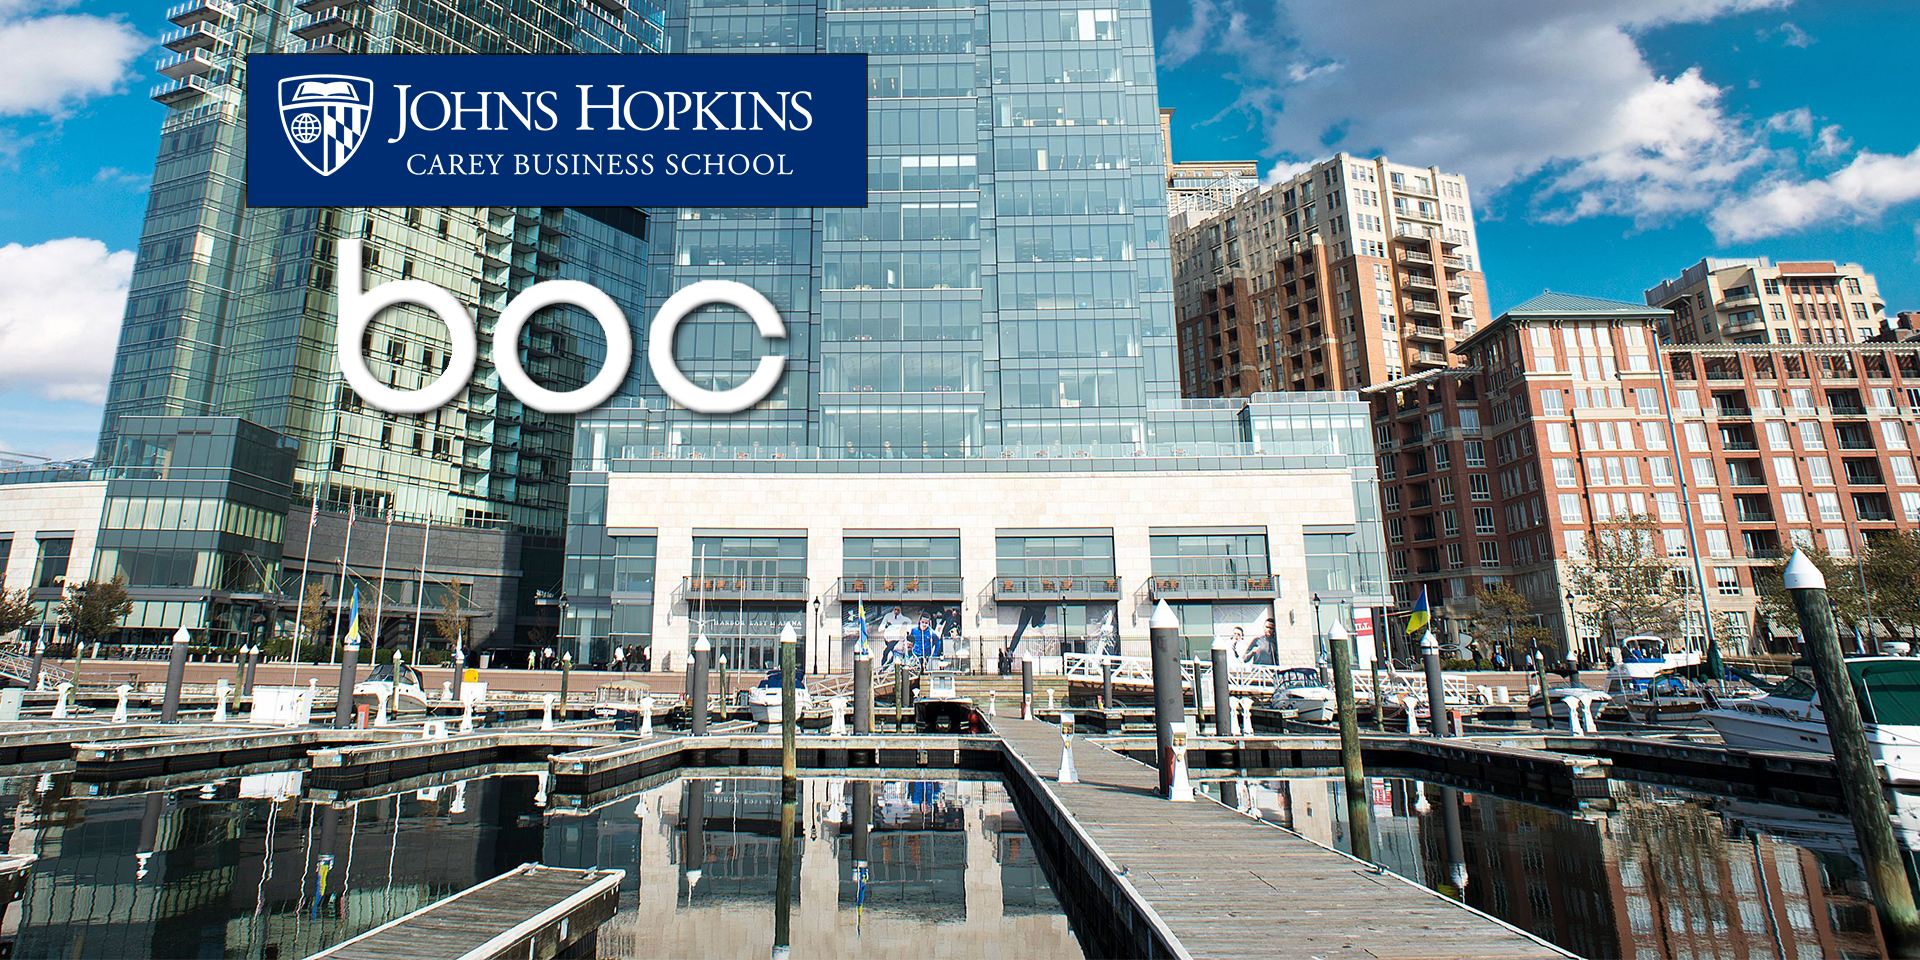 The Carey Business School, Johns Hopkins University, host of the Behavioral Operations Conference